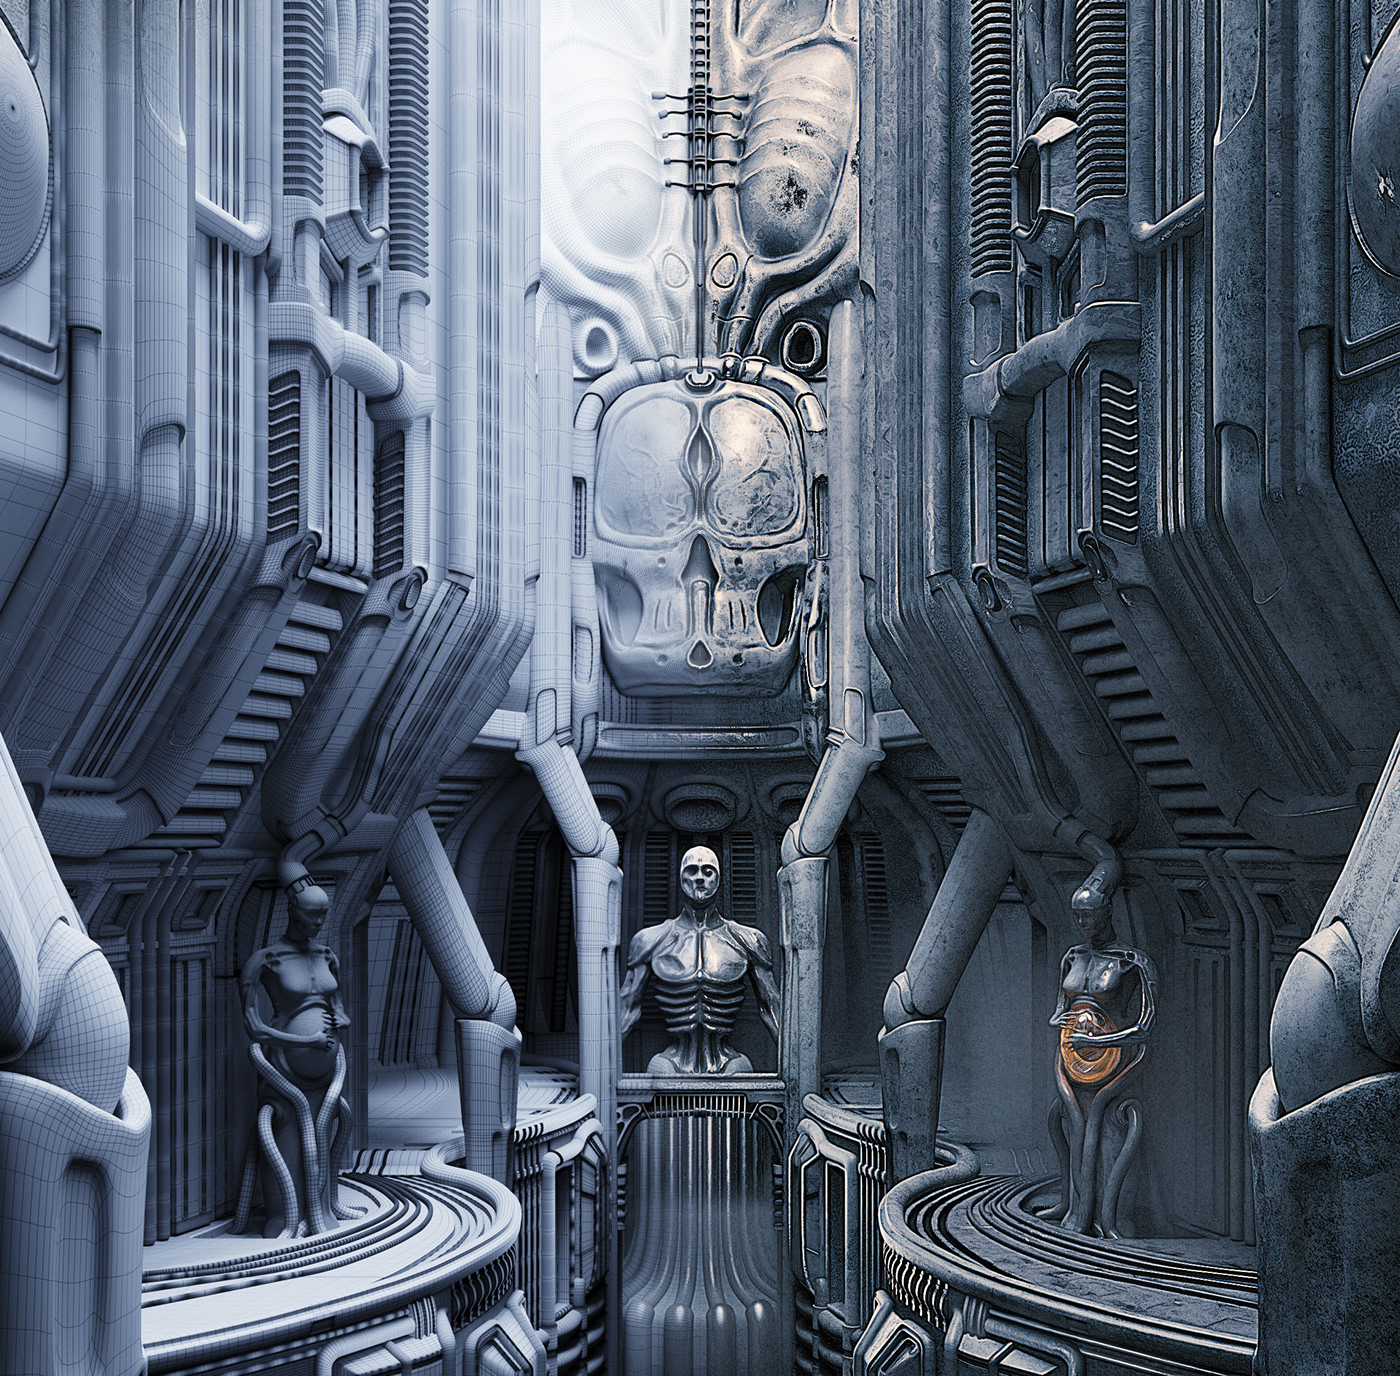 Giger biomechanical statues 3ds max Render visualization architecture corona